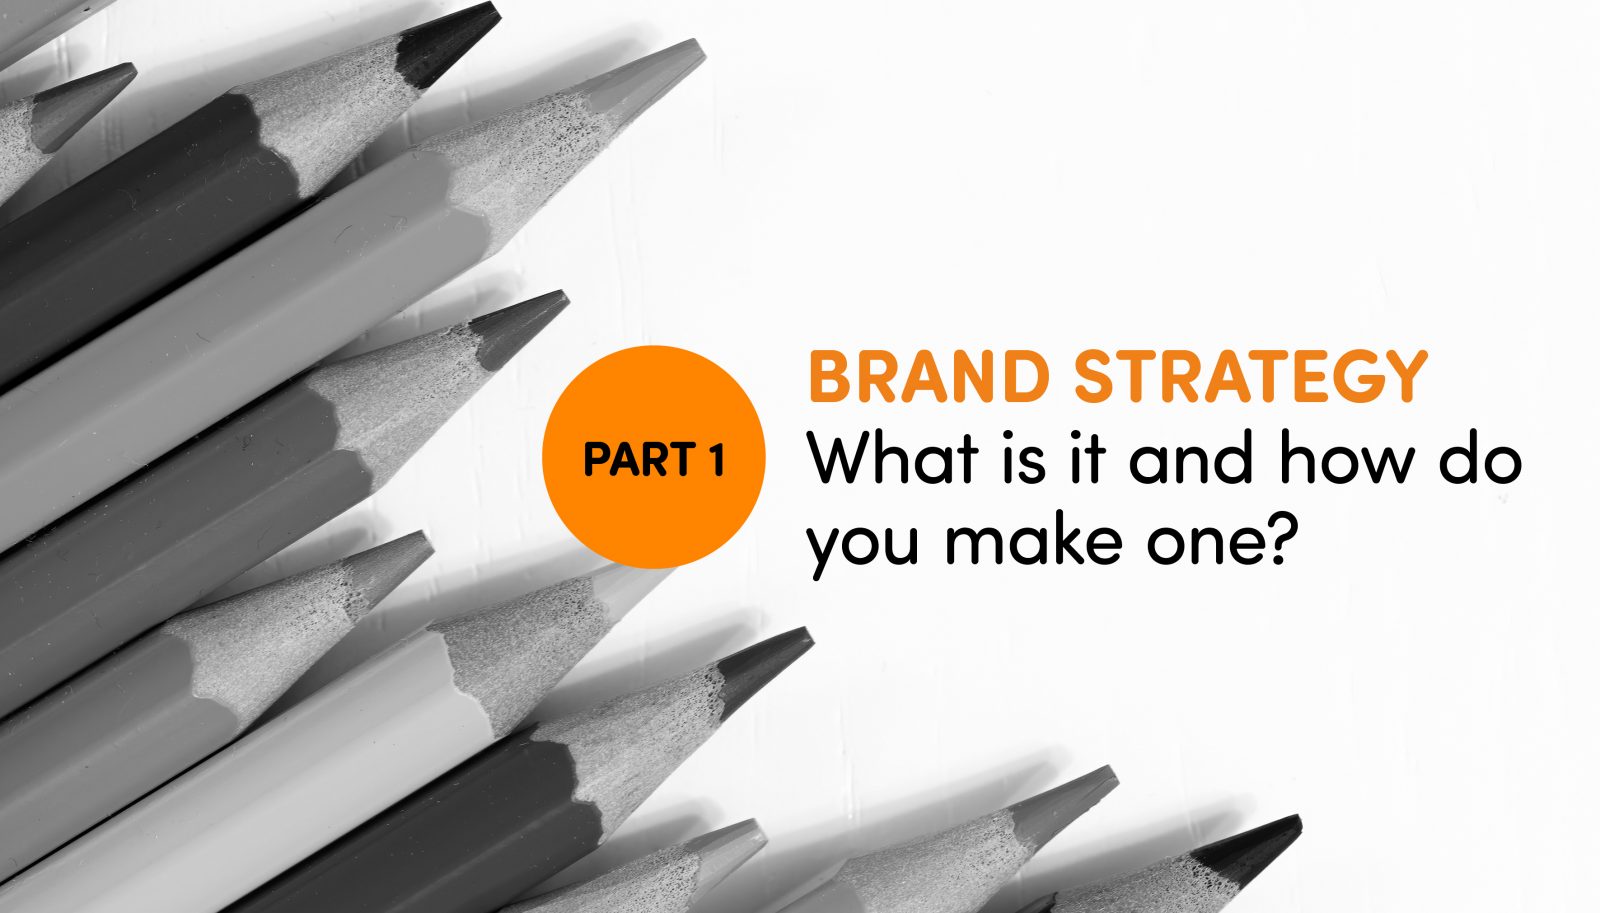 Brand Strategy: What is it and how do you make one?